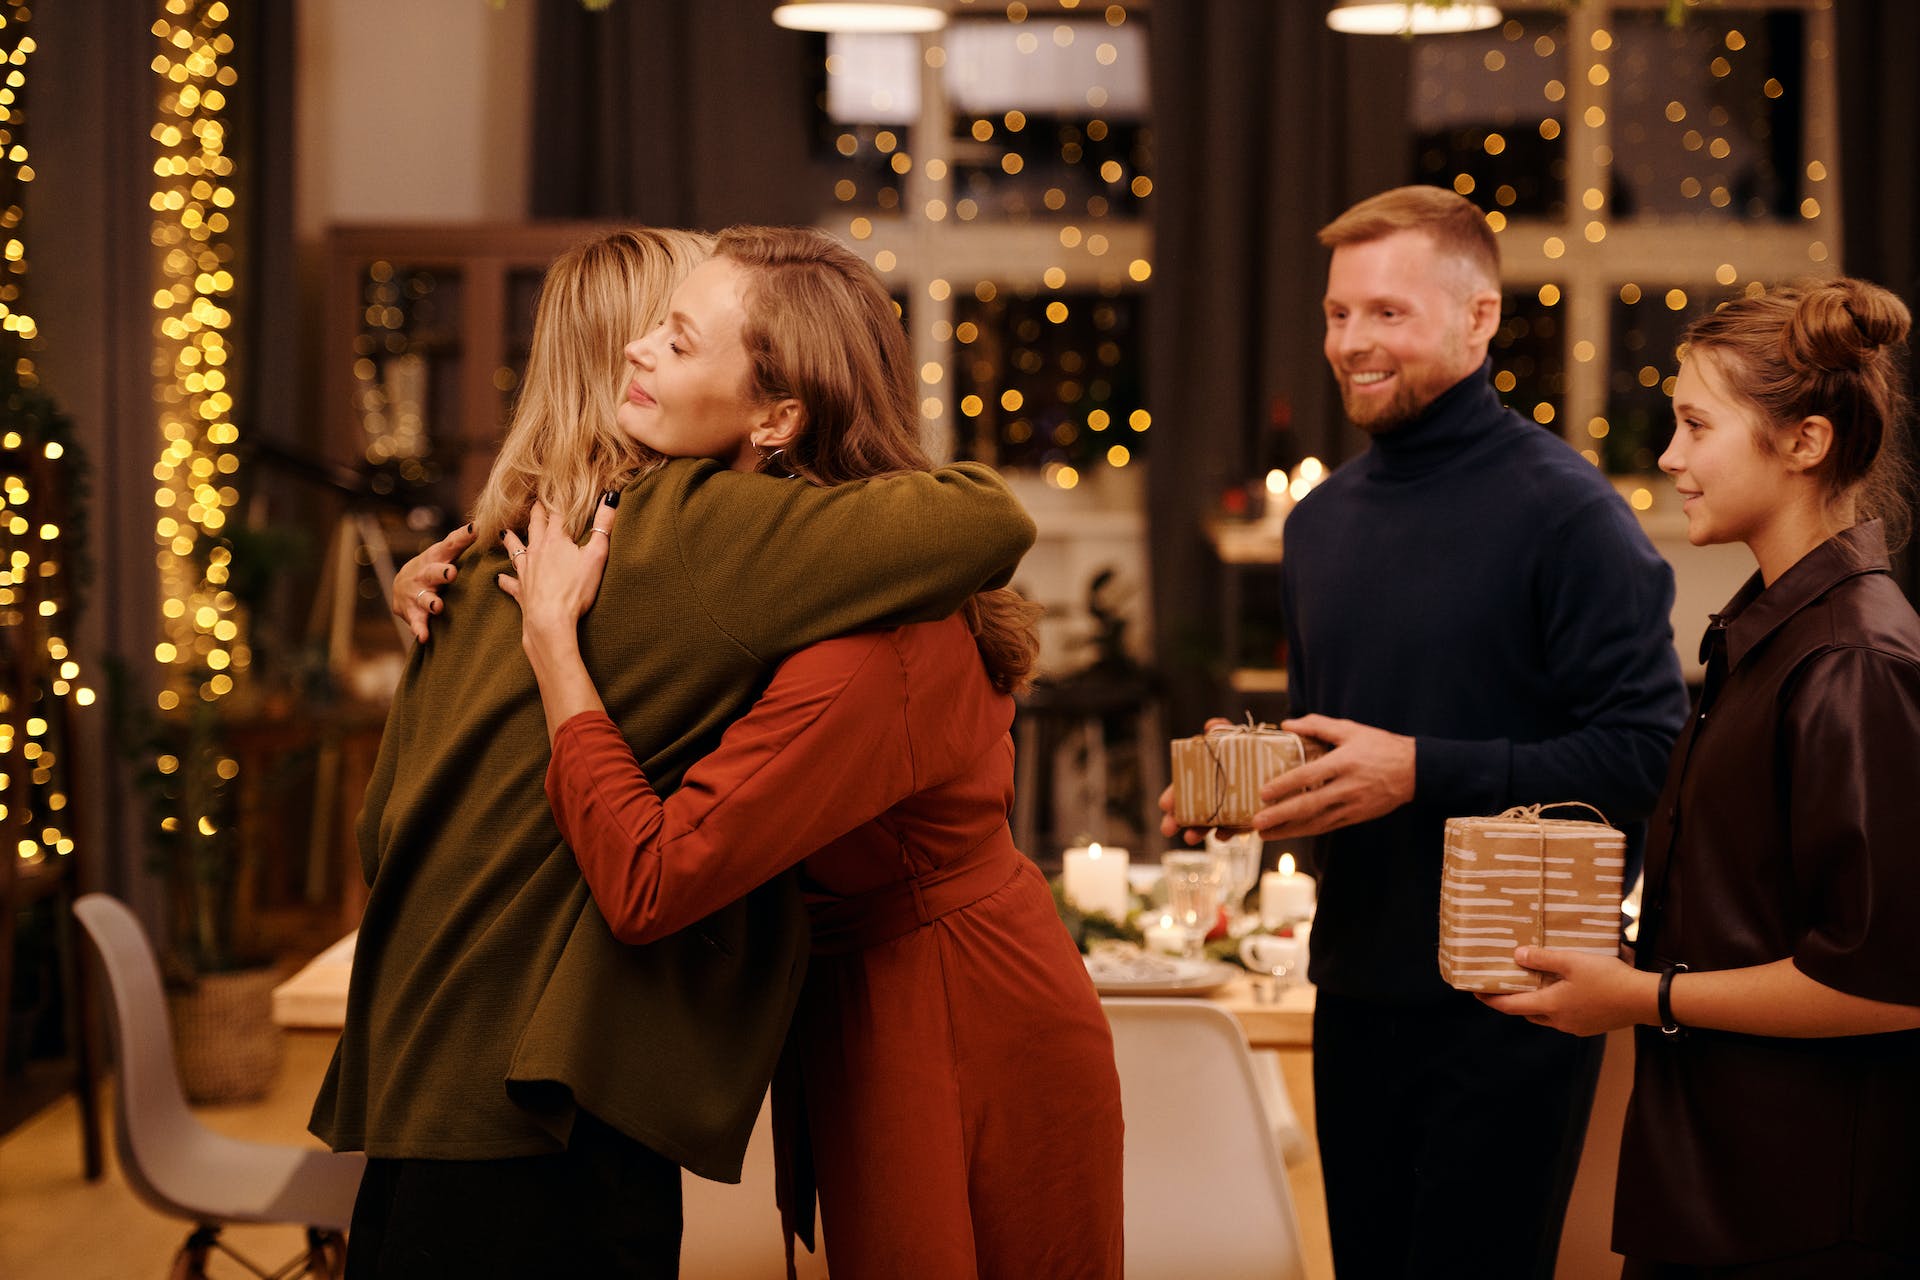 A woman hugging her mother at family dinner | Source: Pexels